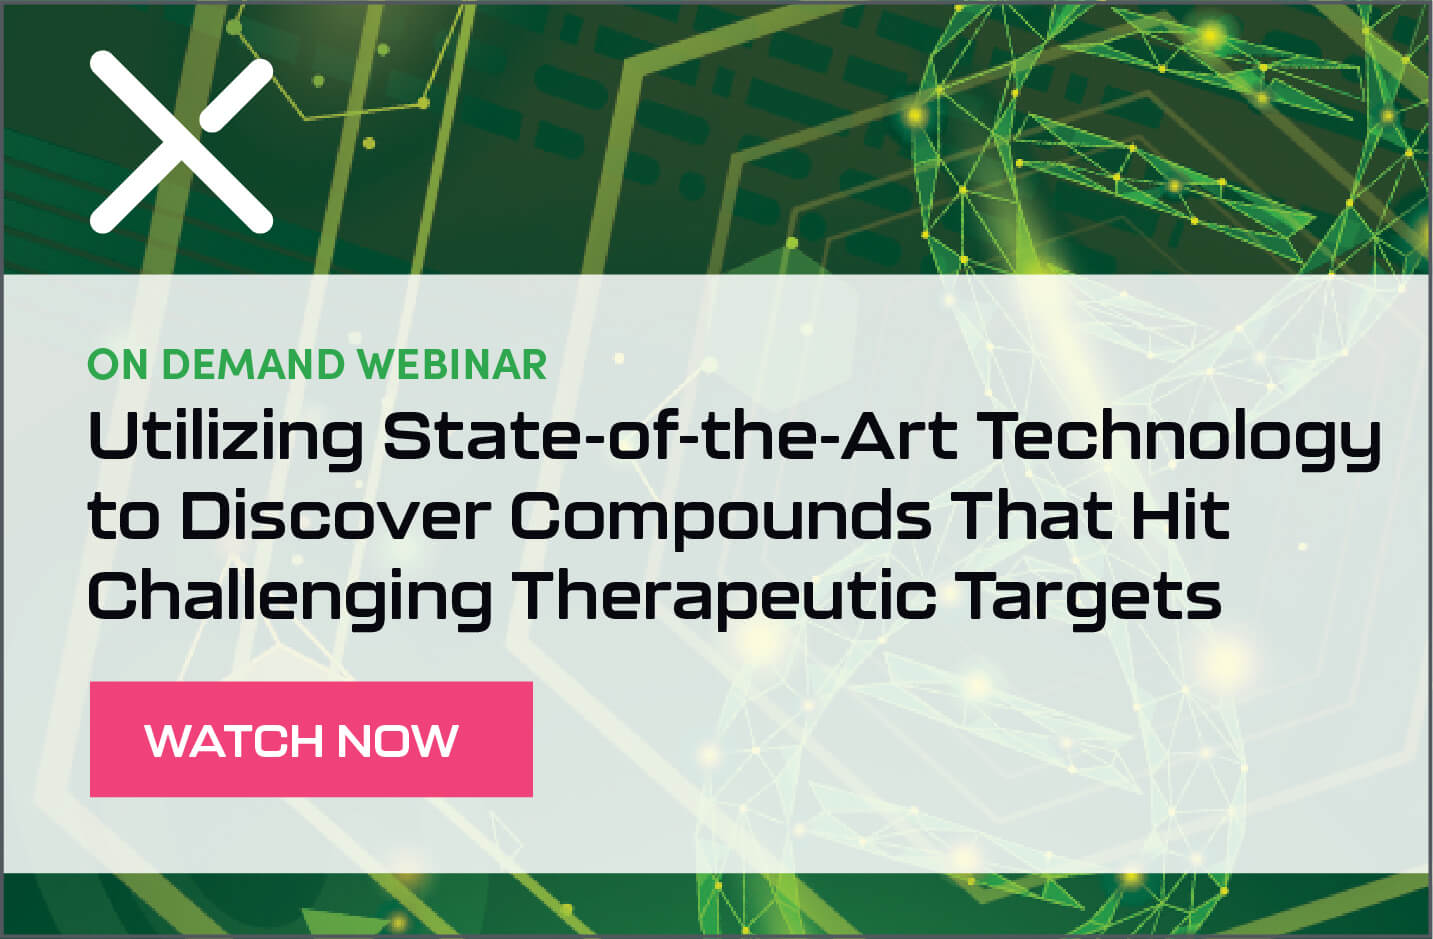 Utilizing State-of-the-Art DEL Technology to Discover Compounds That Hit Challenging Therapeutic Targets